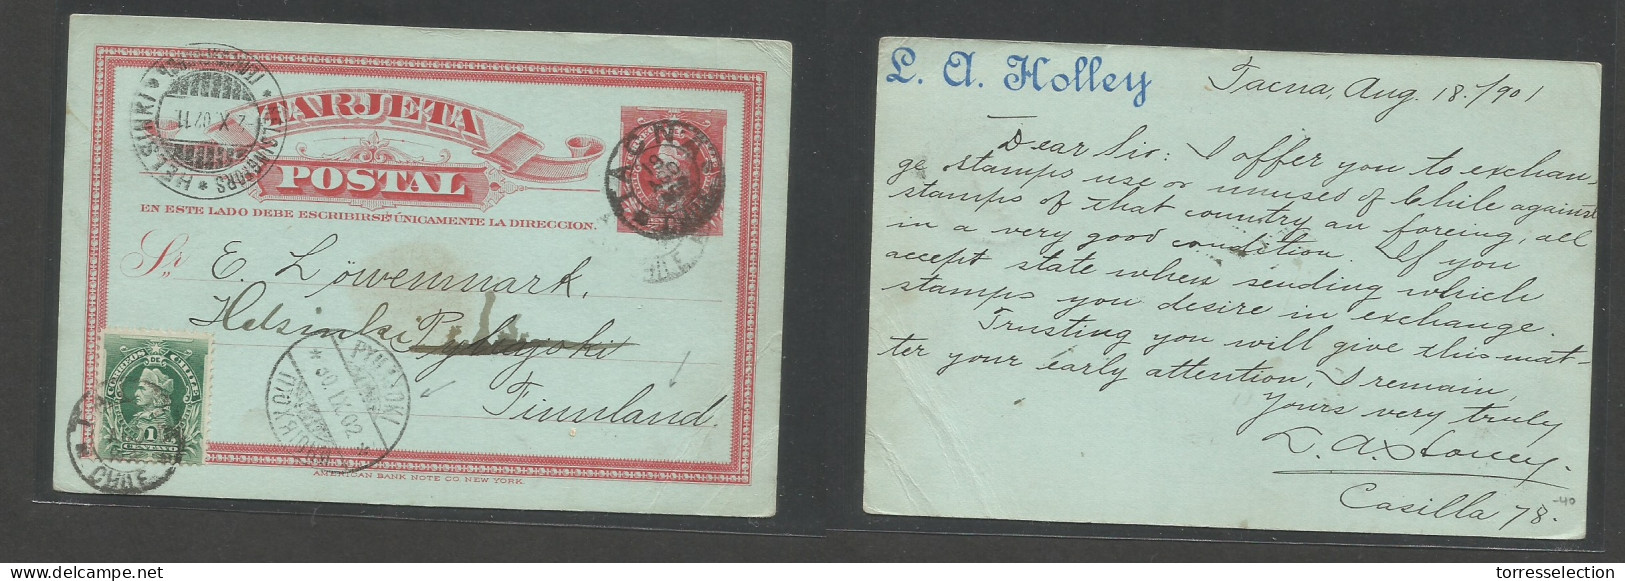 CHILE - Stationery. 1901 (18 Aug) Tacna - Finland, Pyliajoki (30 Sept) 2c Red Colon Stat Ard + 1c Green Adtl, Tied Cds.  - Cile